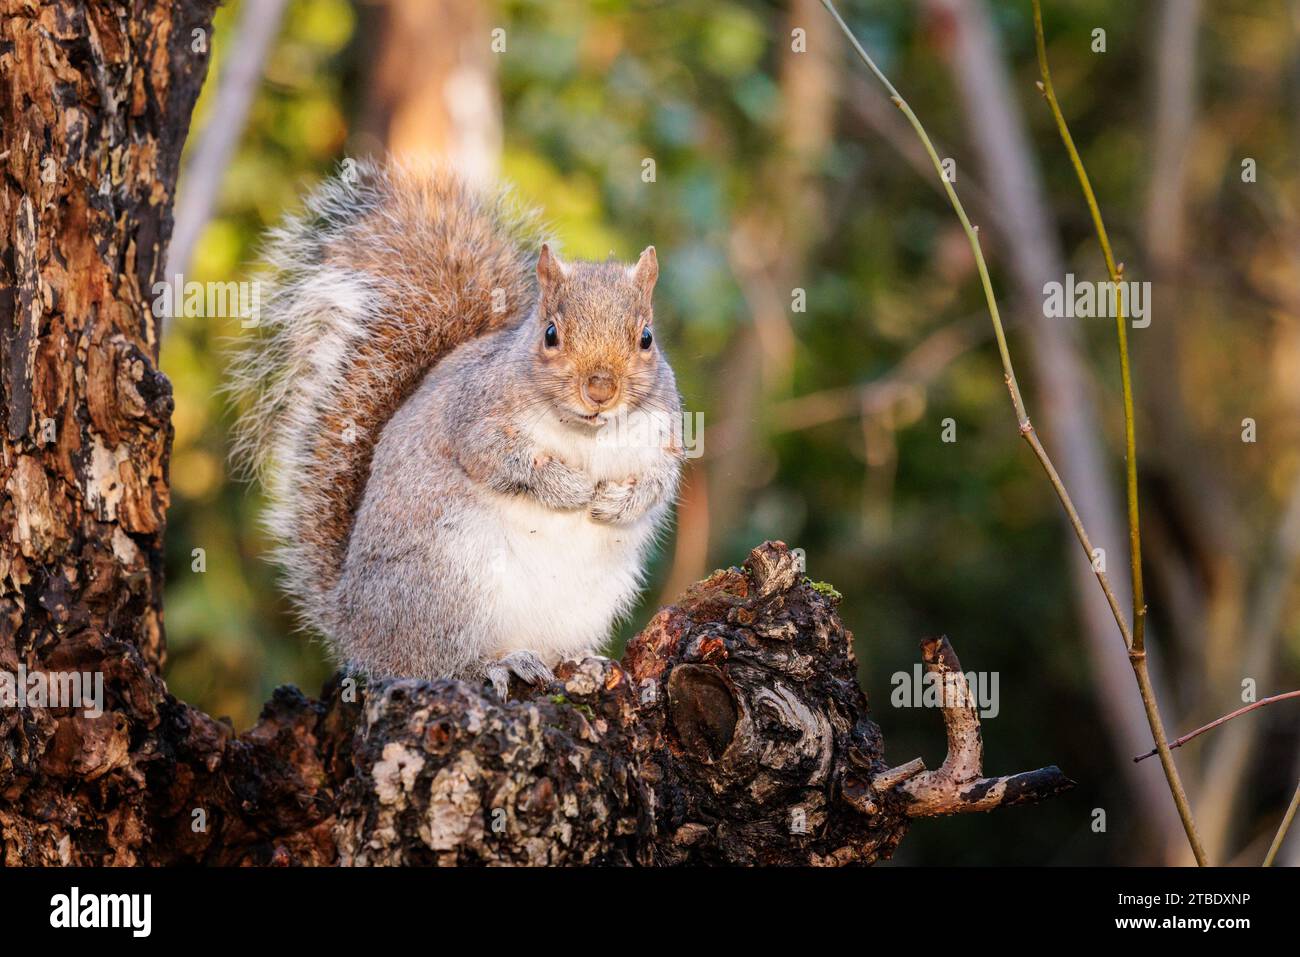 Grey Squirrel (Sciurus carolinensis) perched on a log in the late autumn woodland. Photo by Amanda Rose/Alamy Stock Photo